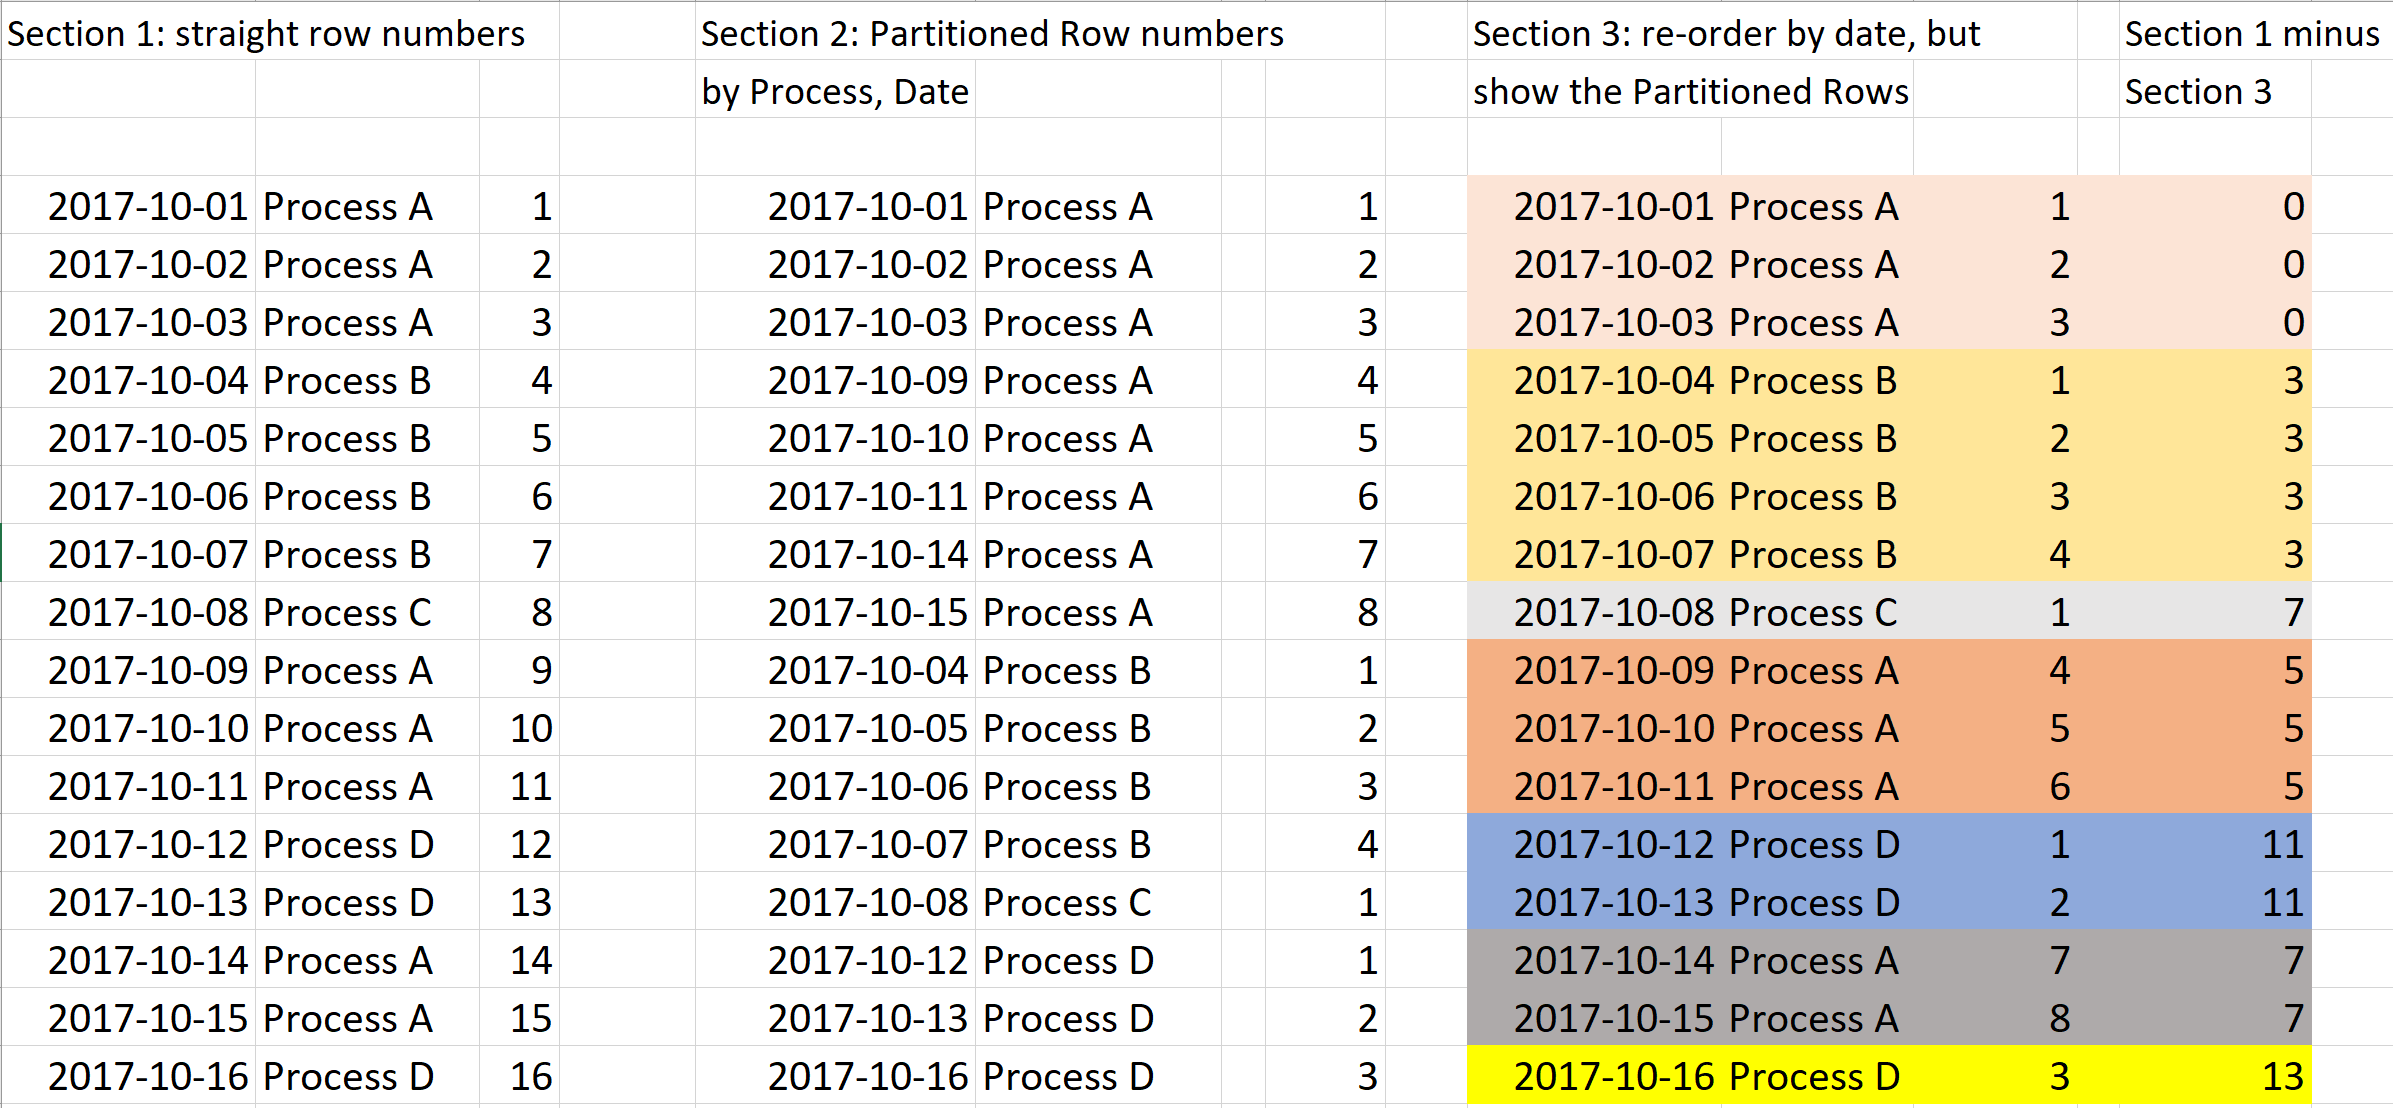 Figure 8: Rank each day by date, then by process date, then subtract one ranking from the other